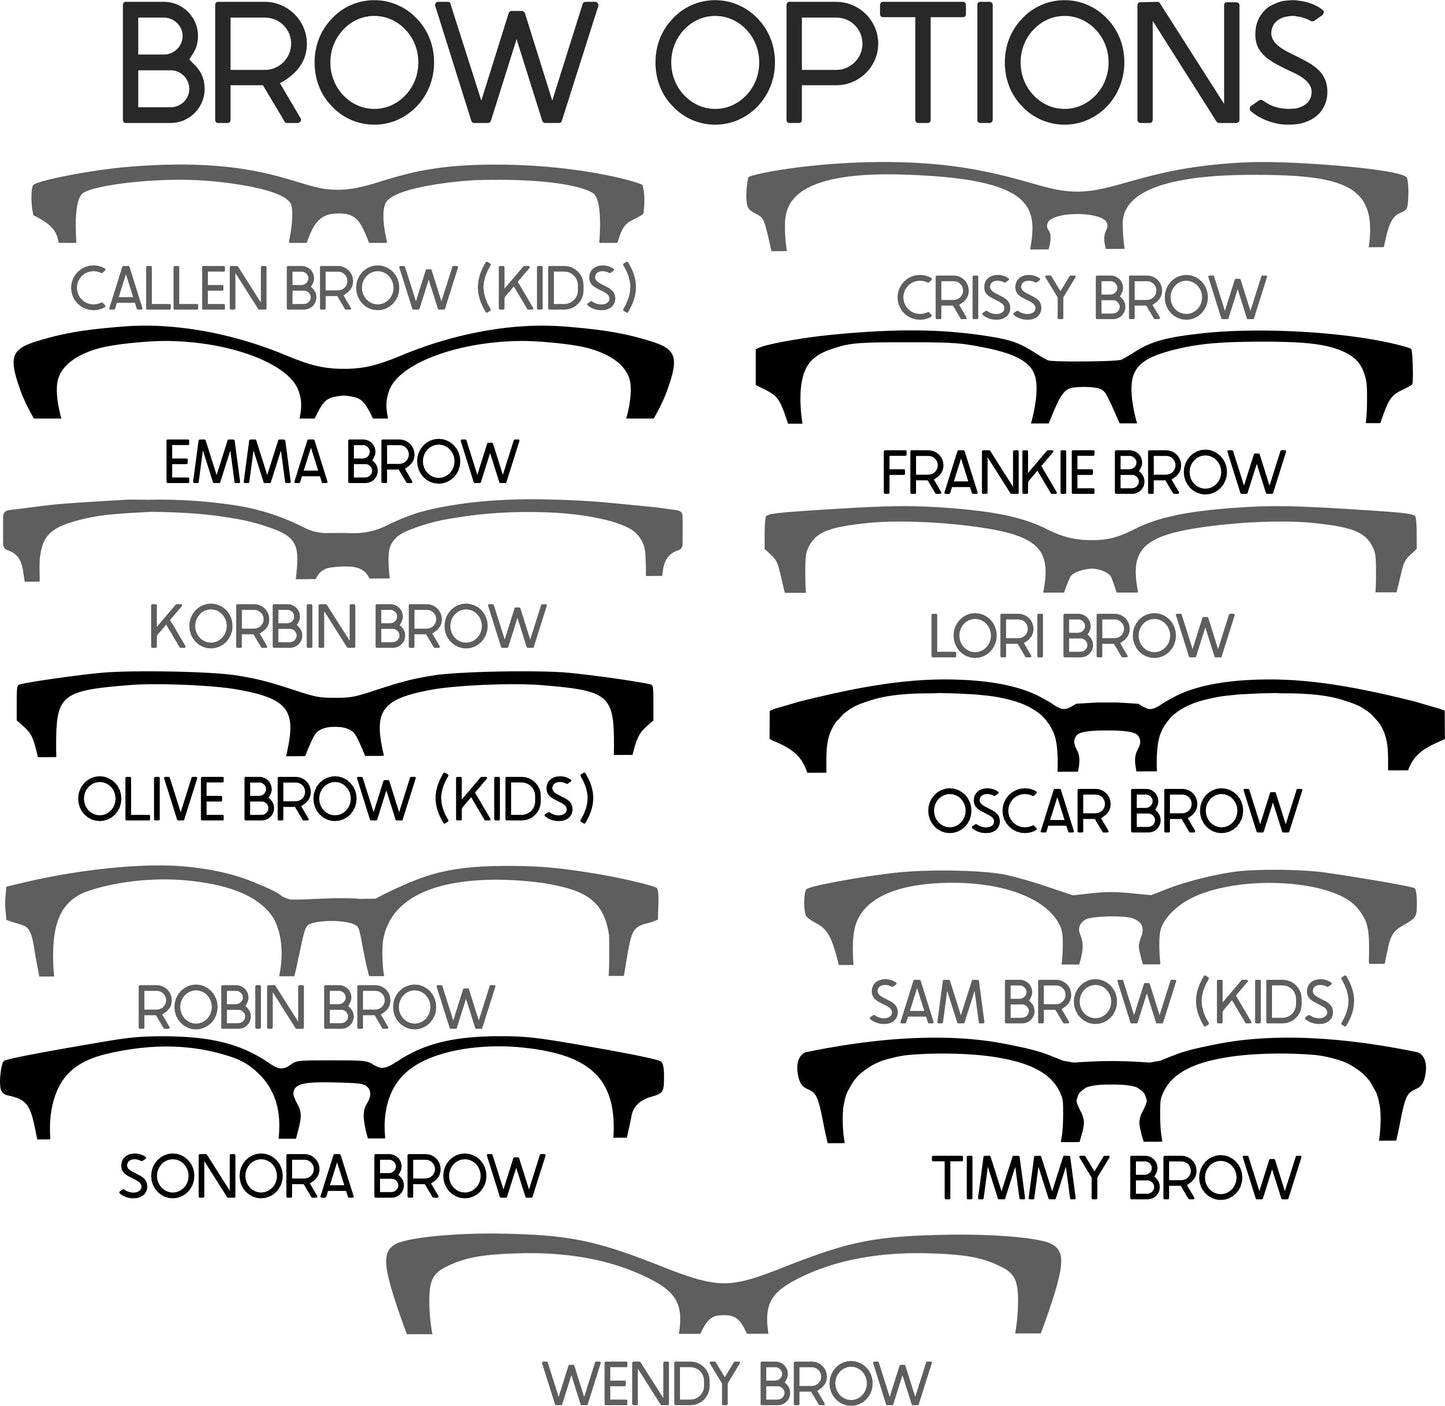 HAIR COLOR BRUSH Eyewear Frame Toppers COMES WITH MAGNETS